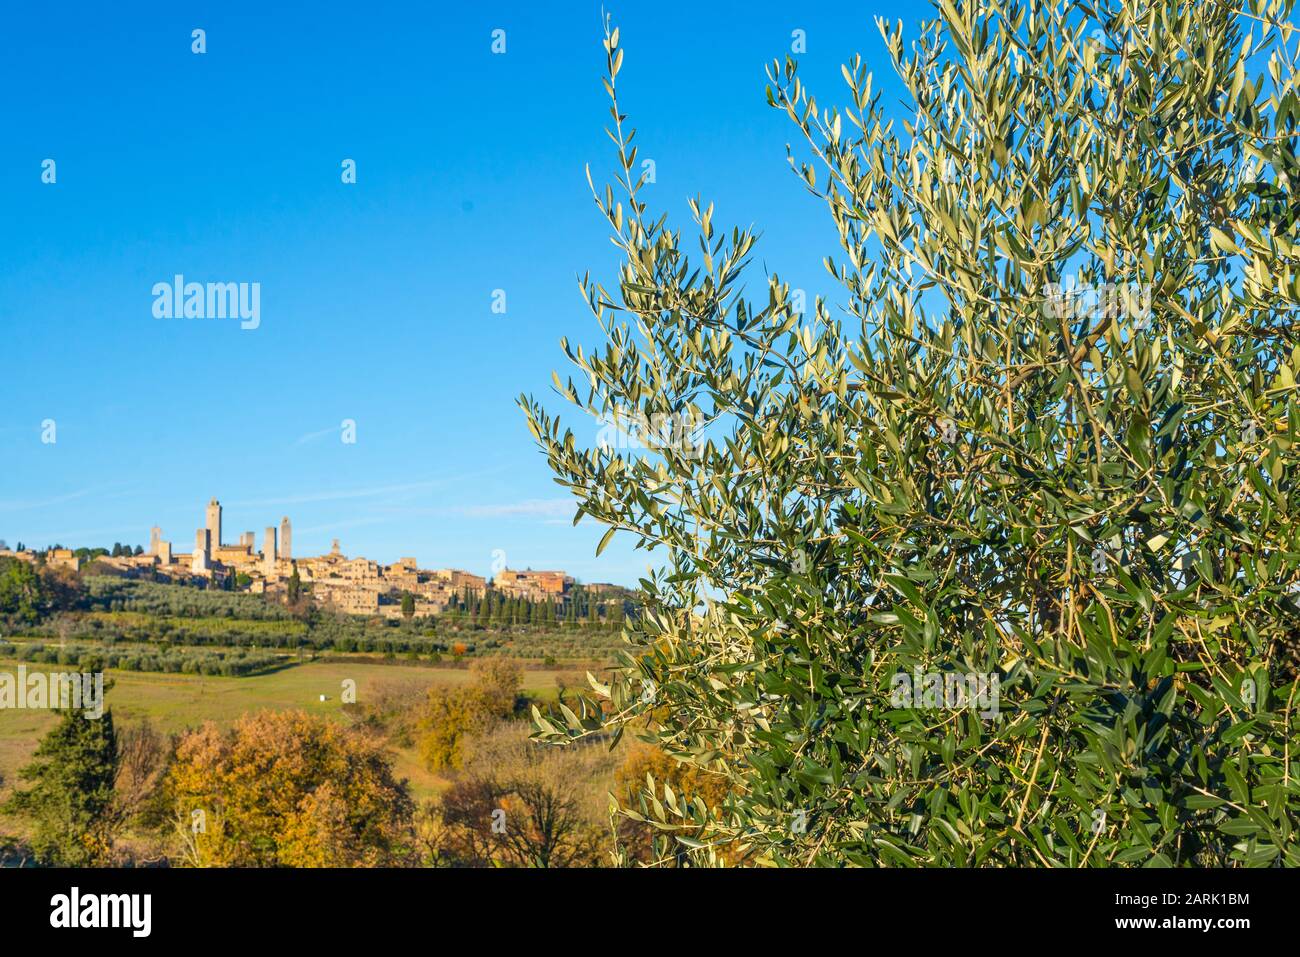 View of the Italian town of San Gimignano, a small walled medieval hill town in Tuscany known as the Town of Fine Towers. Tuscan landscape with hills Stock Photo